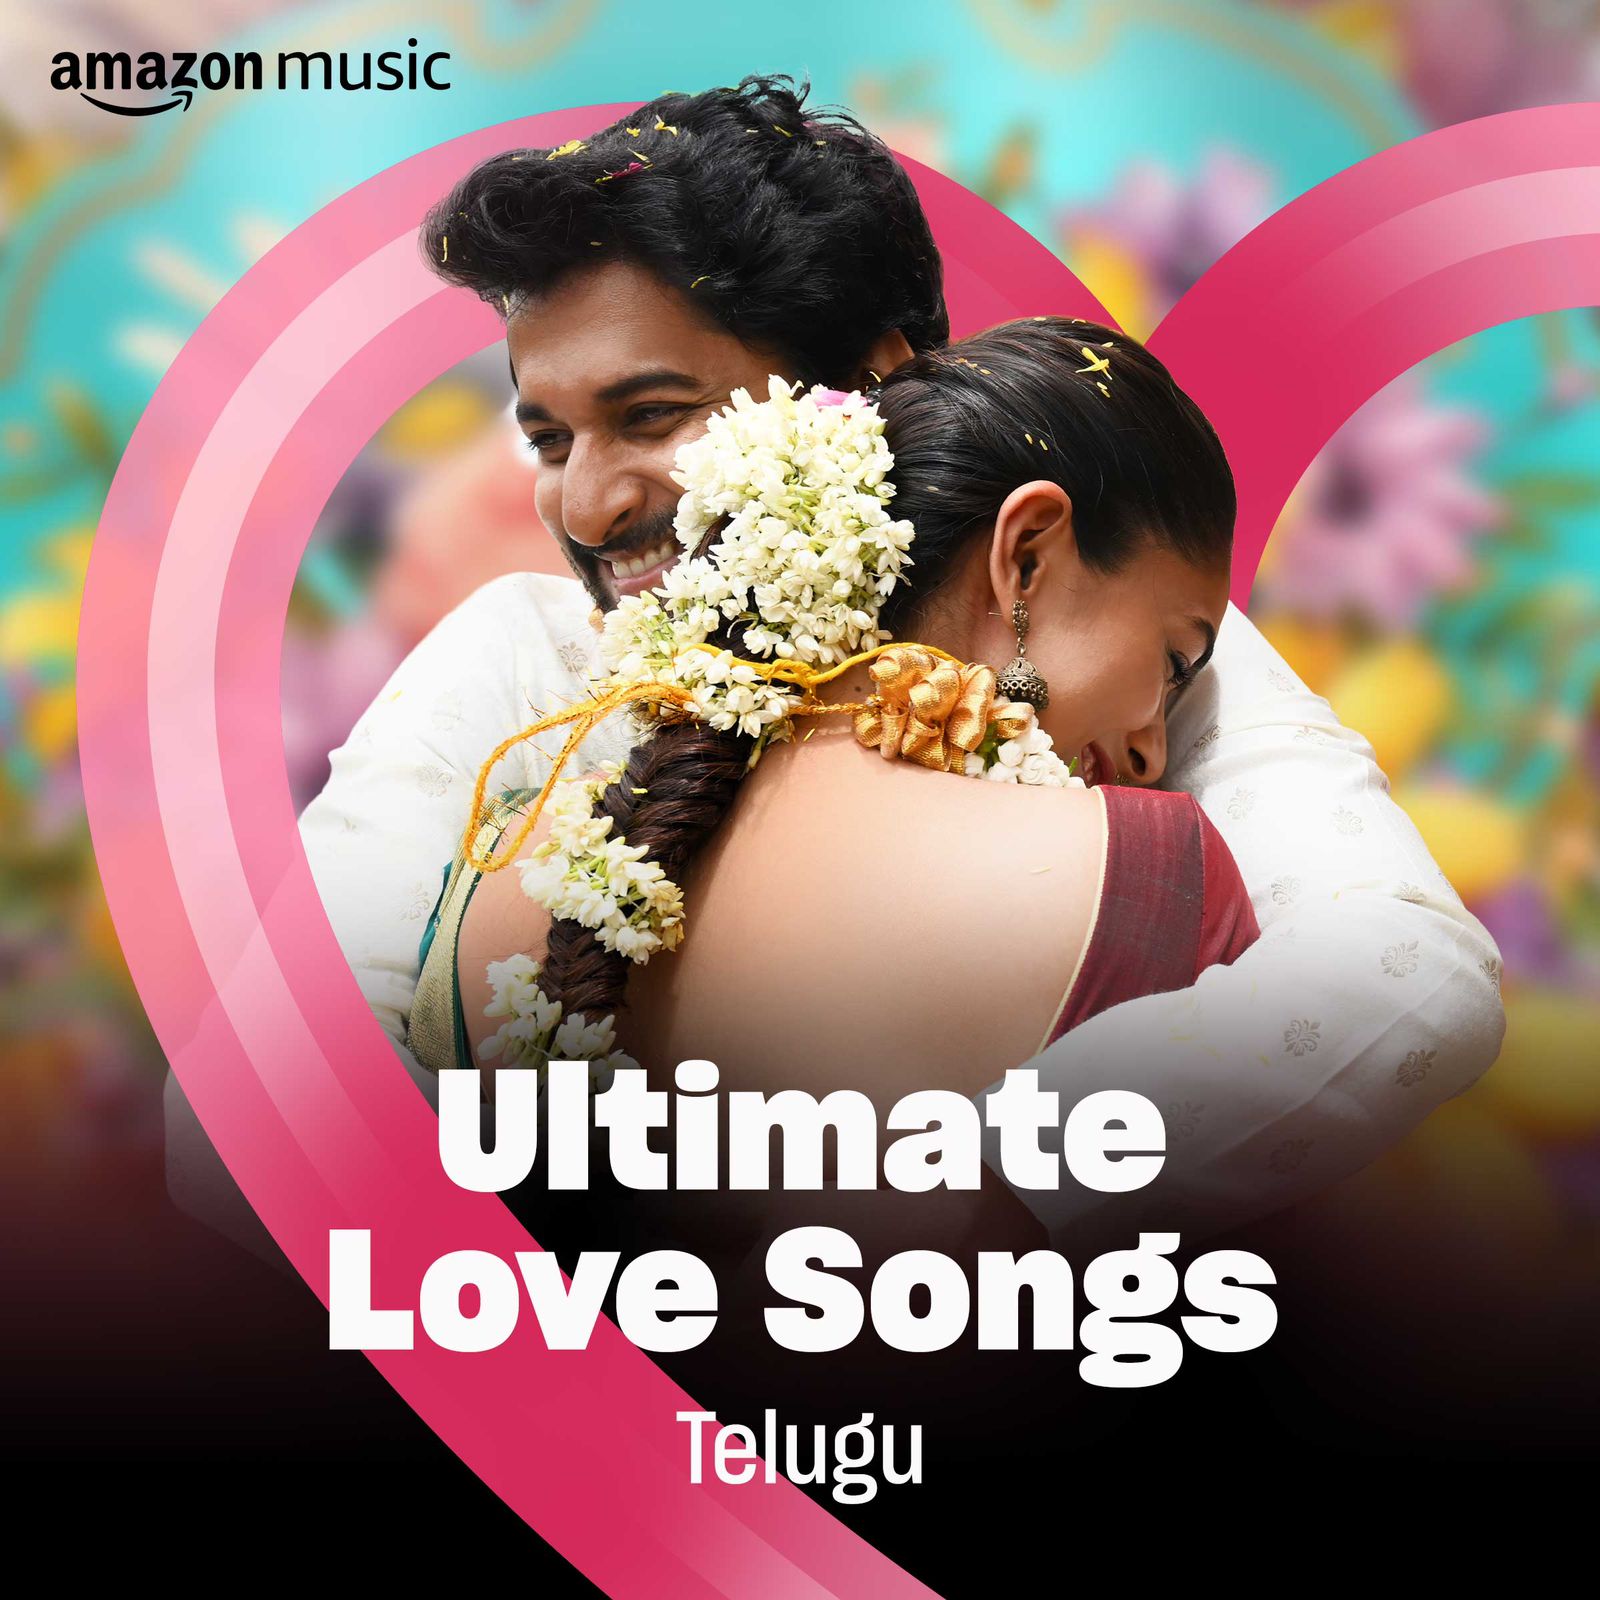 Amazon Music All Set to Ring in Valentine’s Day with its Shades of Love Playlists